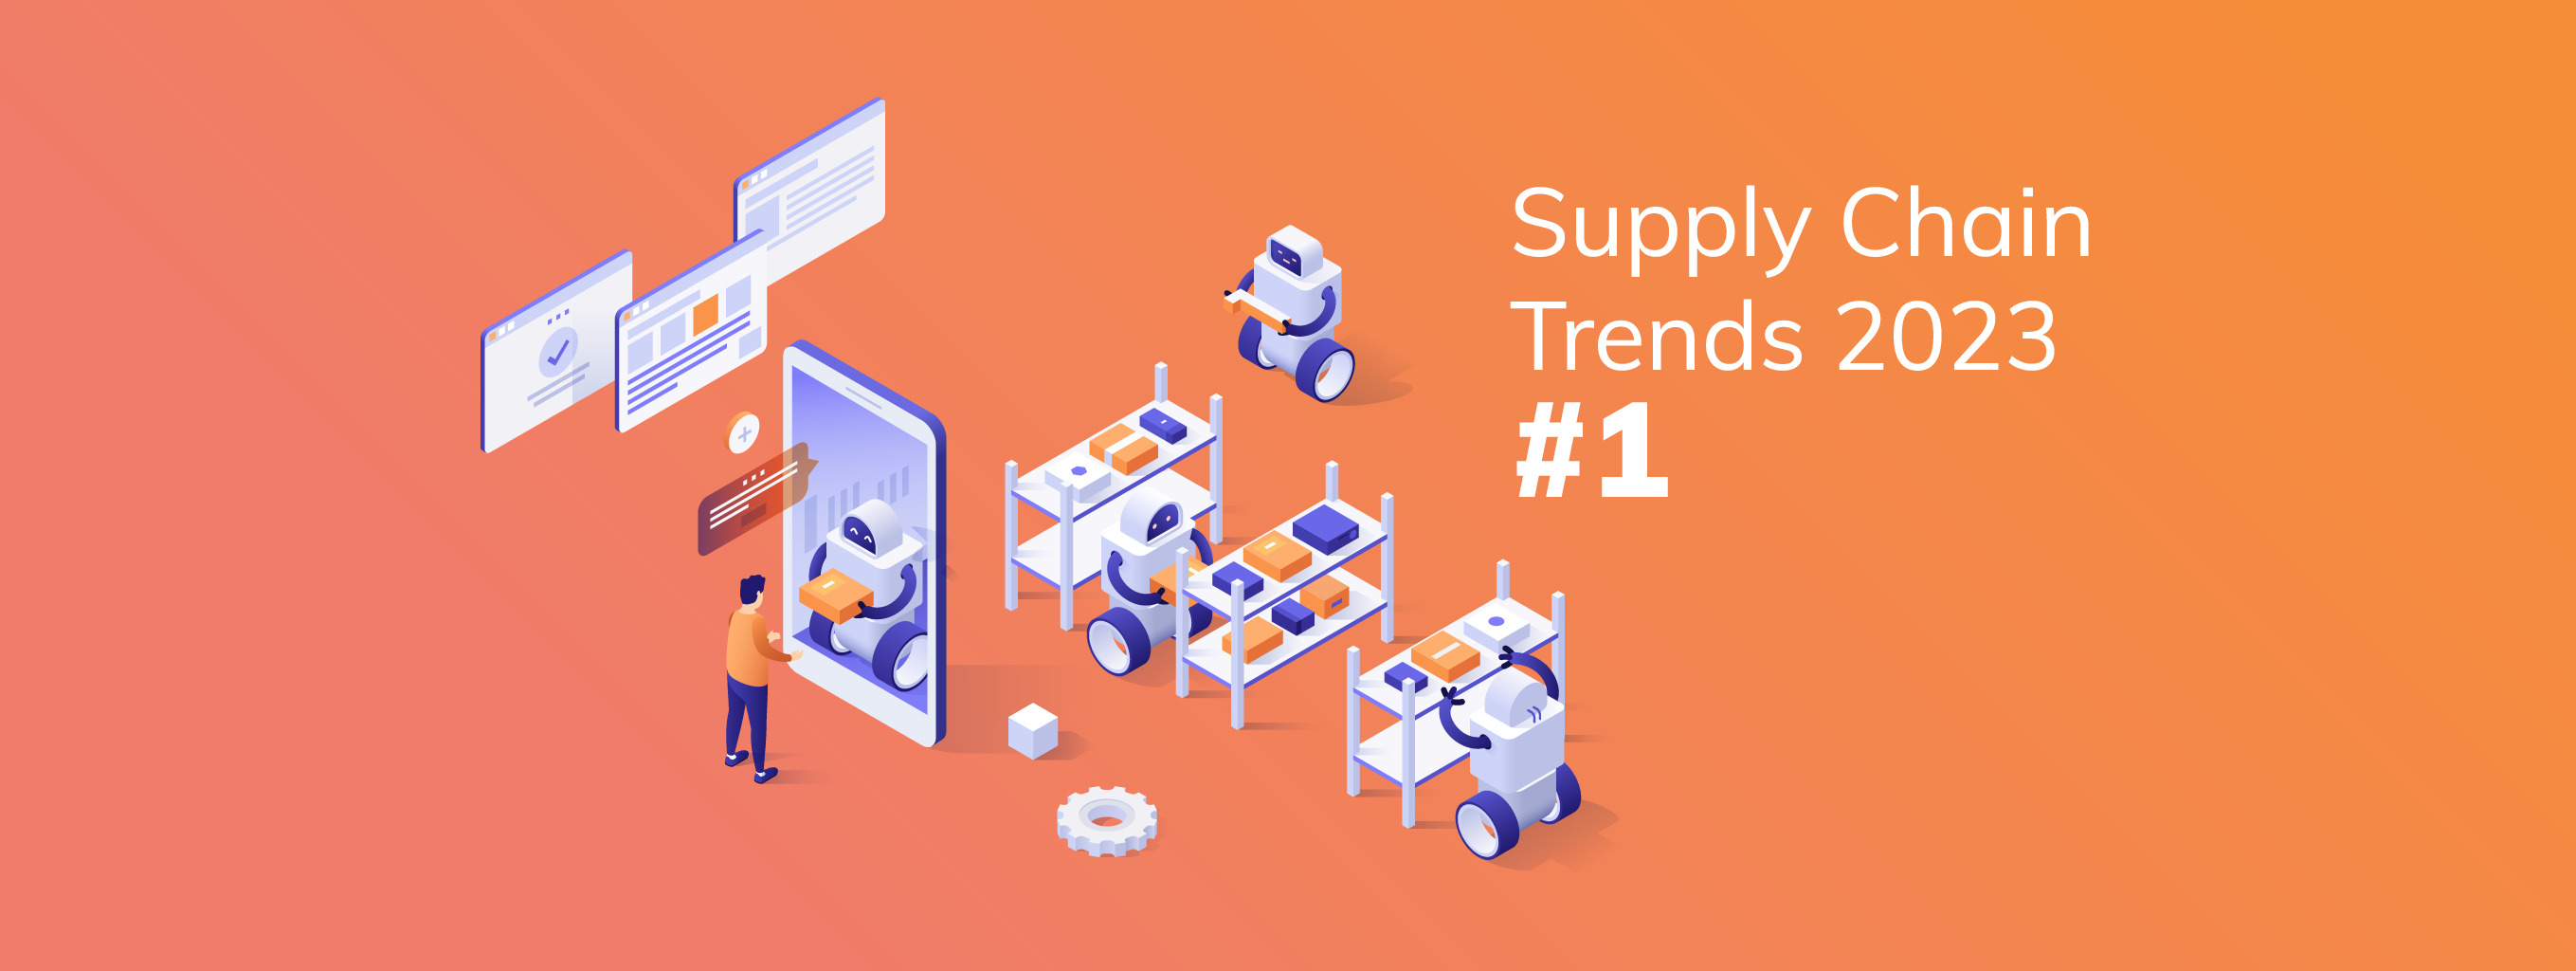 Supply chain trends 2023 #1: Automation and risk